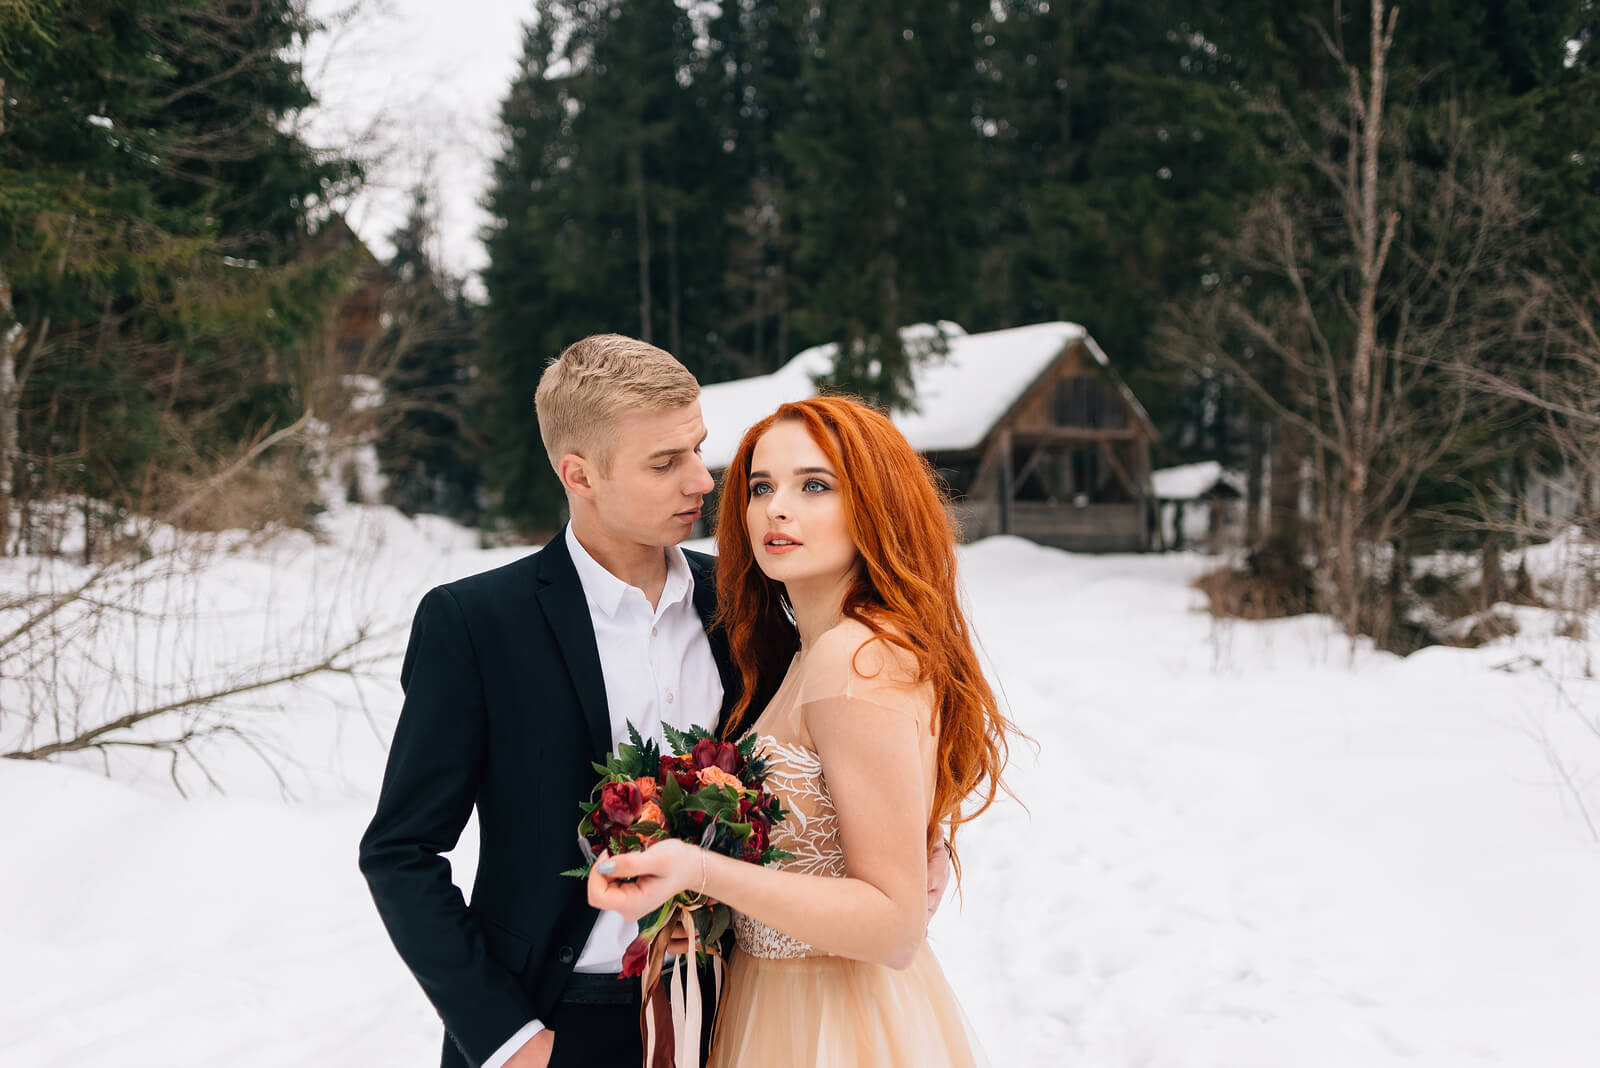 A wedding wedding with bride and groom stood in snow